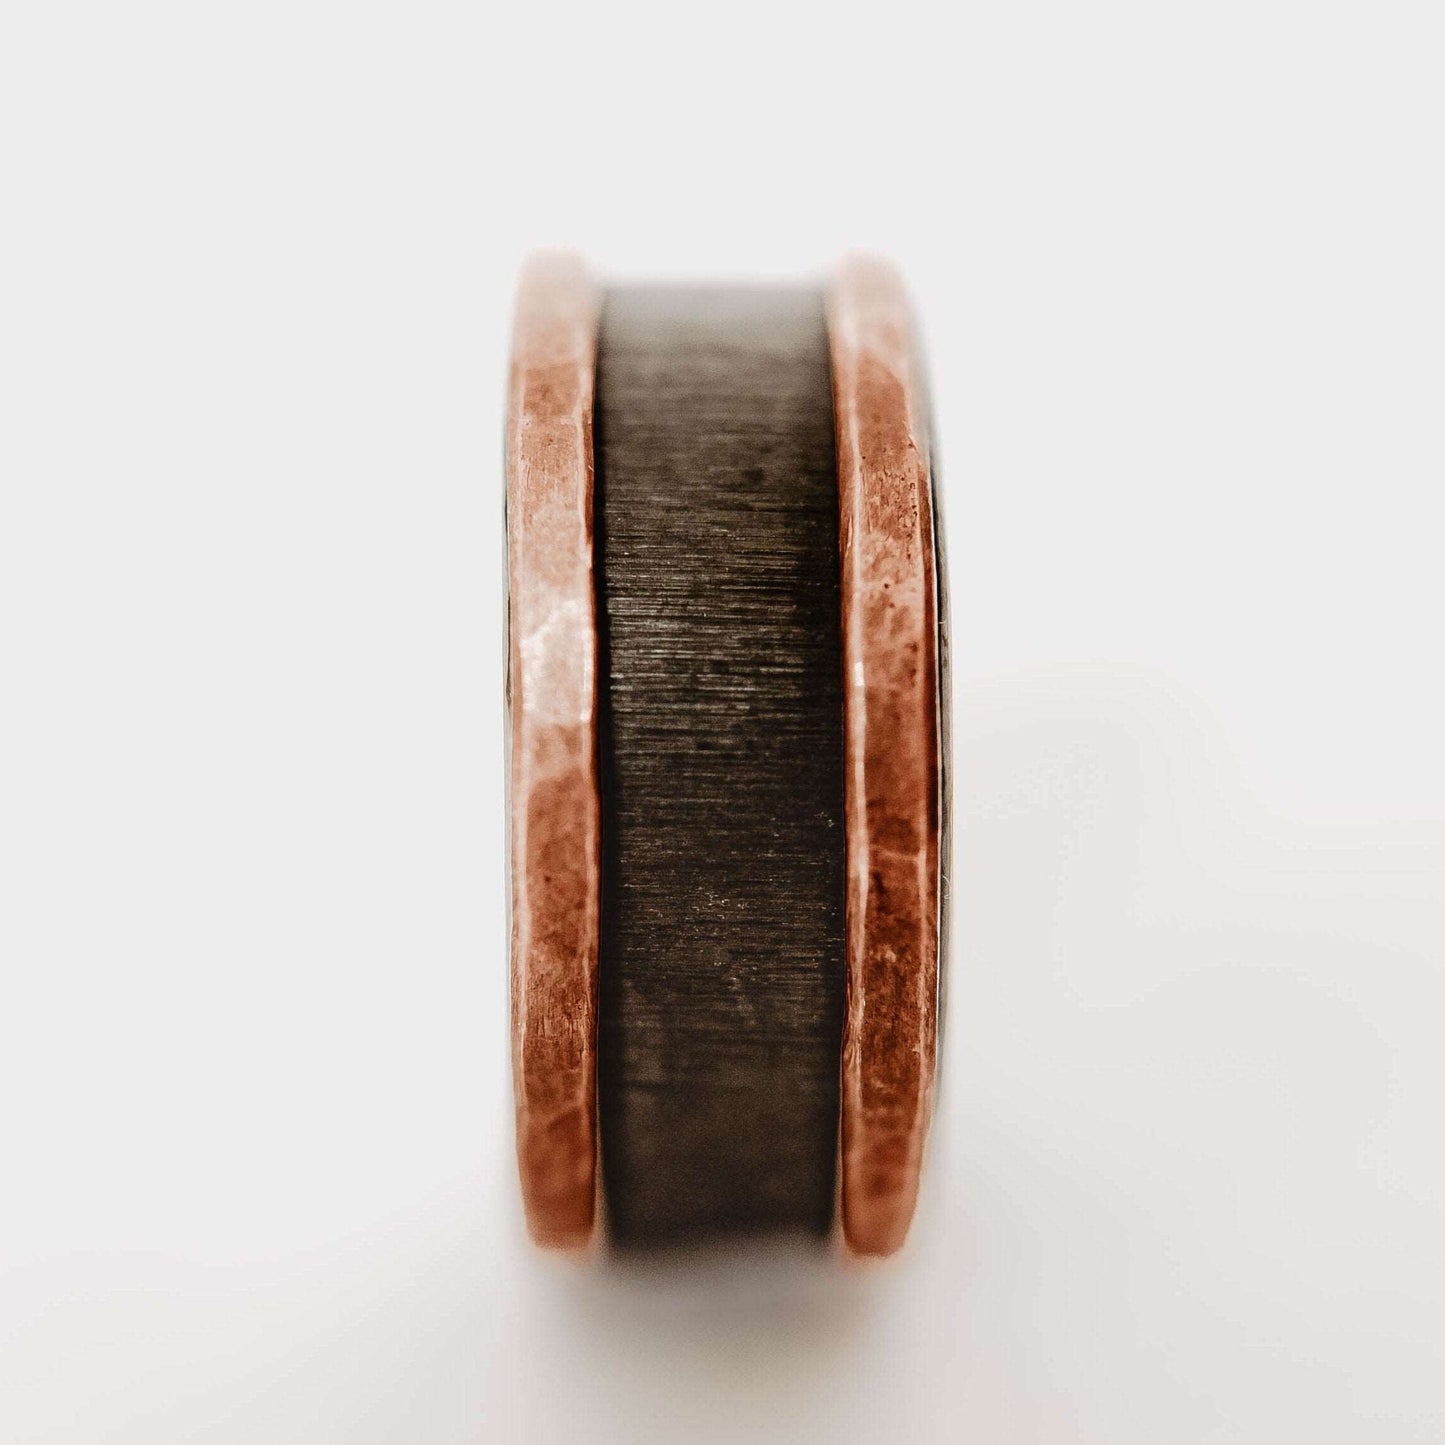 Mens zirconium and copper wedding band. This photo shows a vertical grit zirconium band with a copper band on each edge. (Vertical with white background)